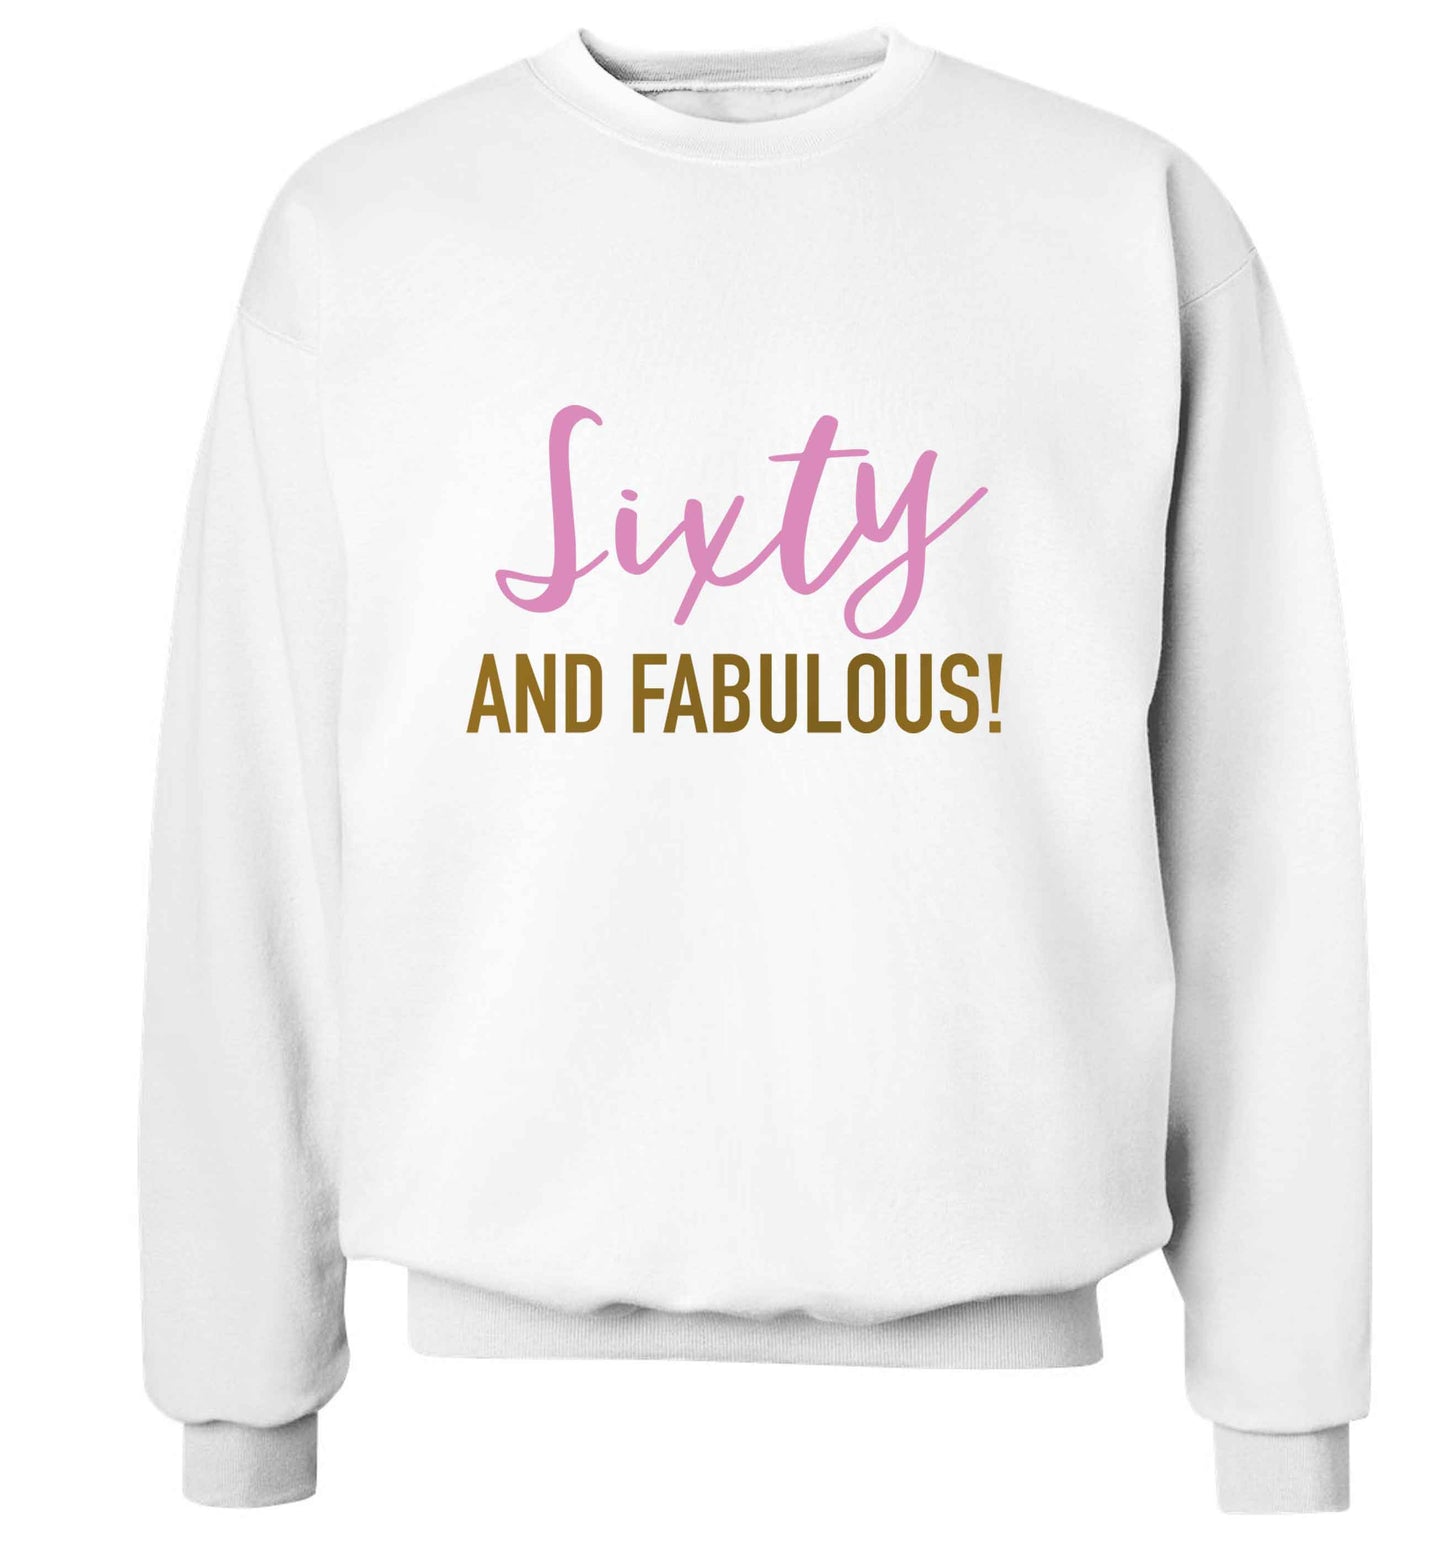 Sixty and fabulous adult's unisex white sweater 2XL